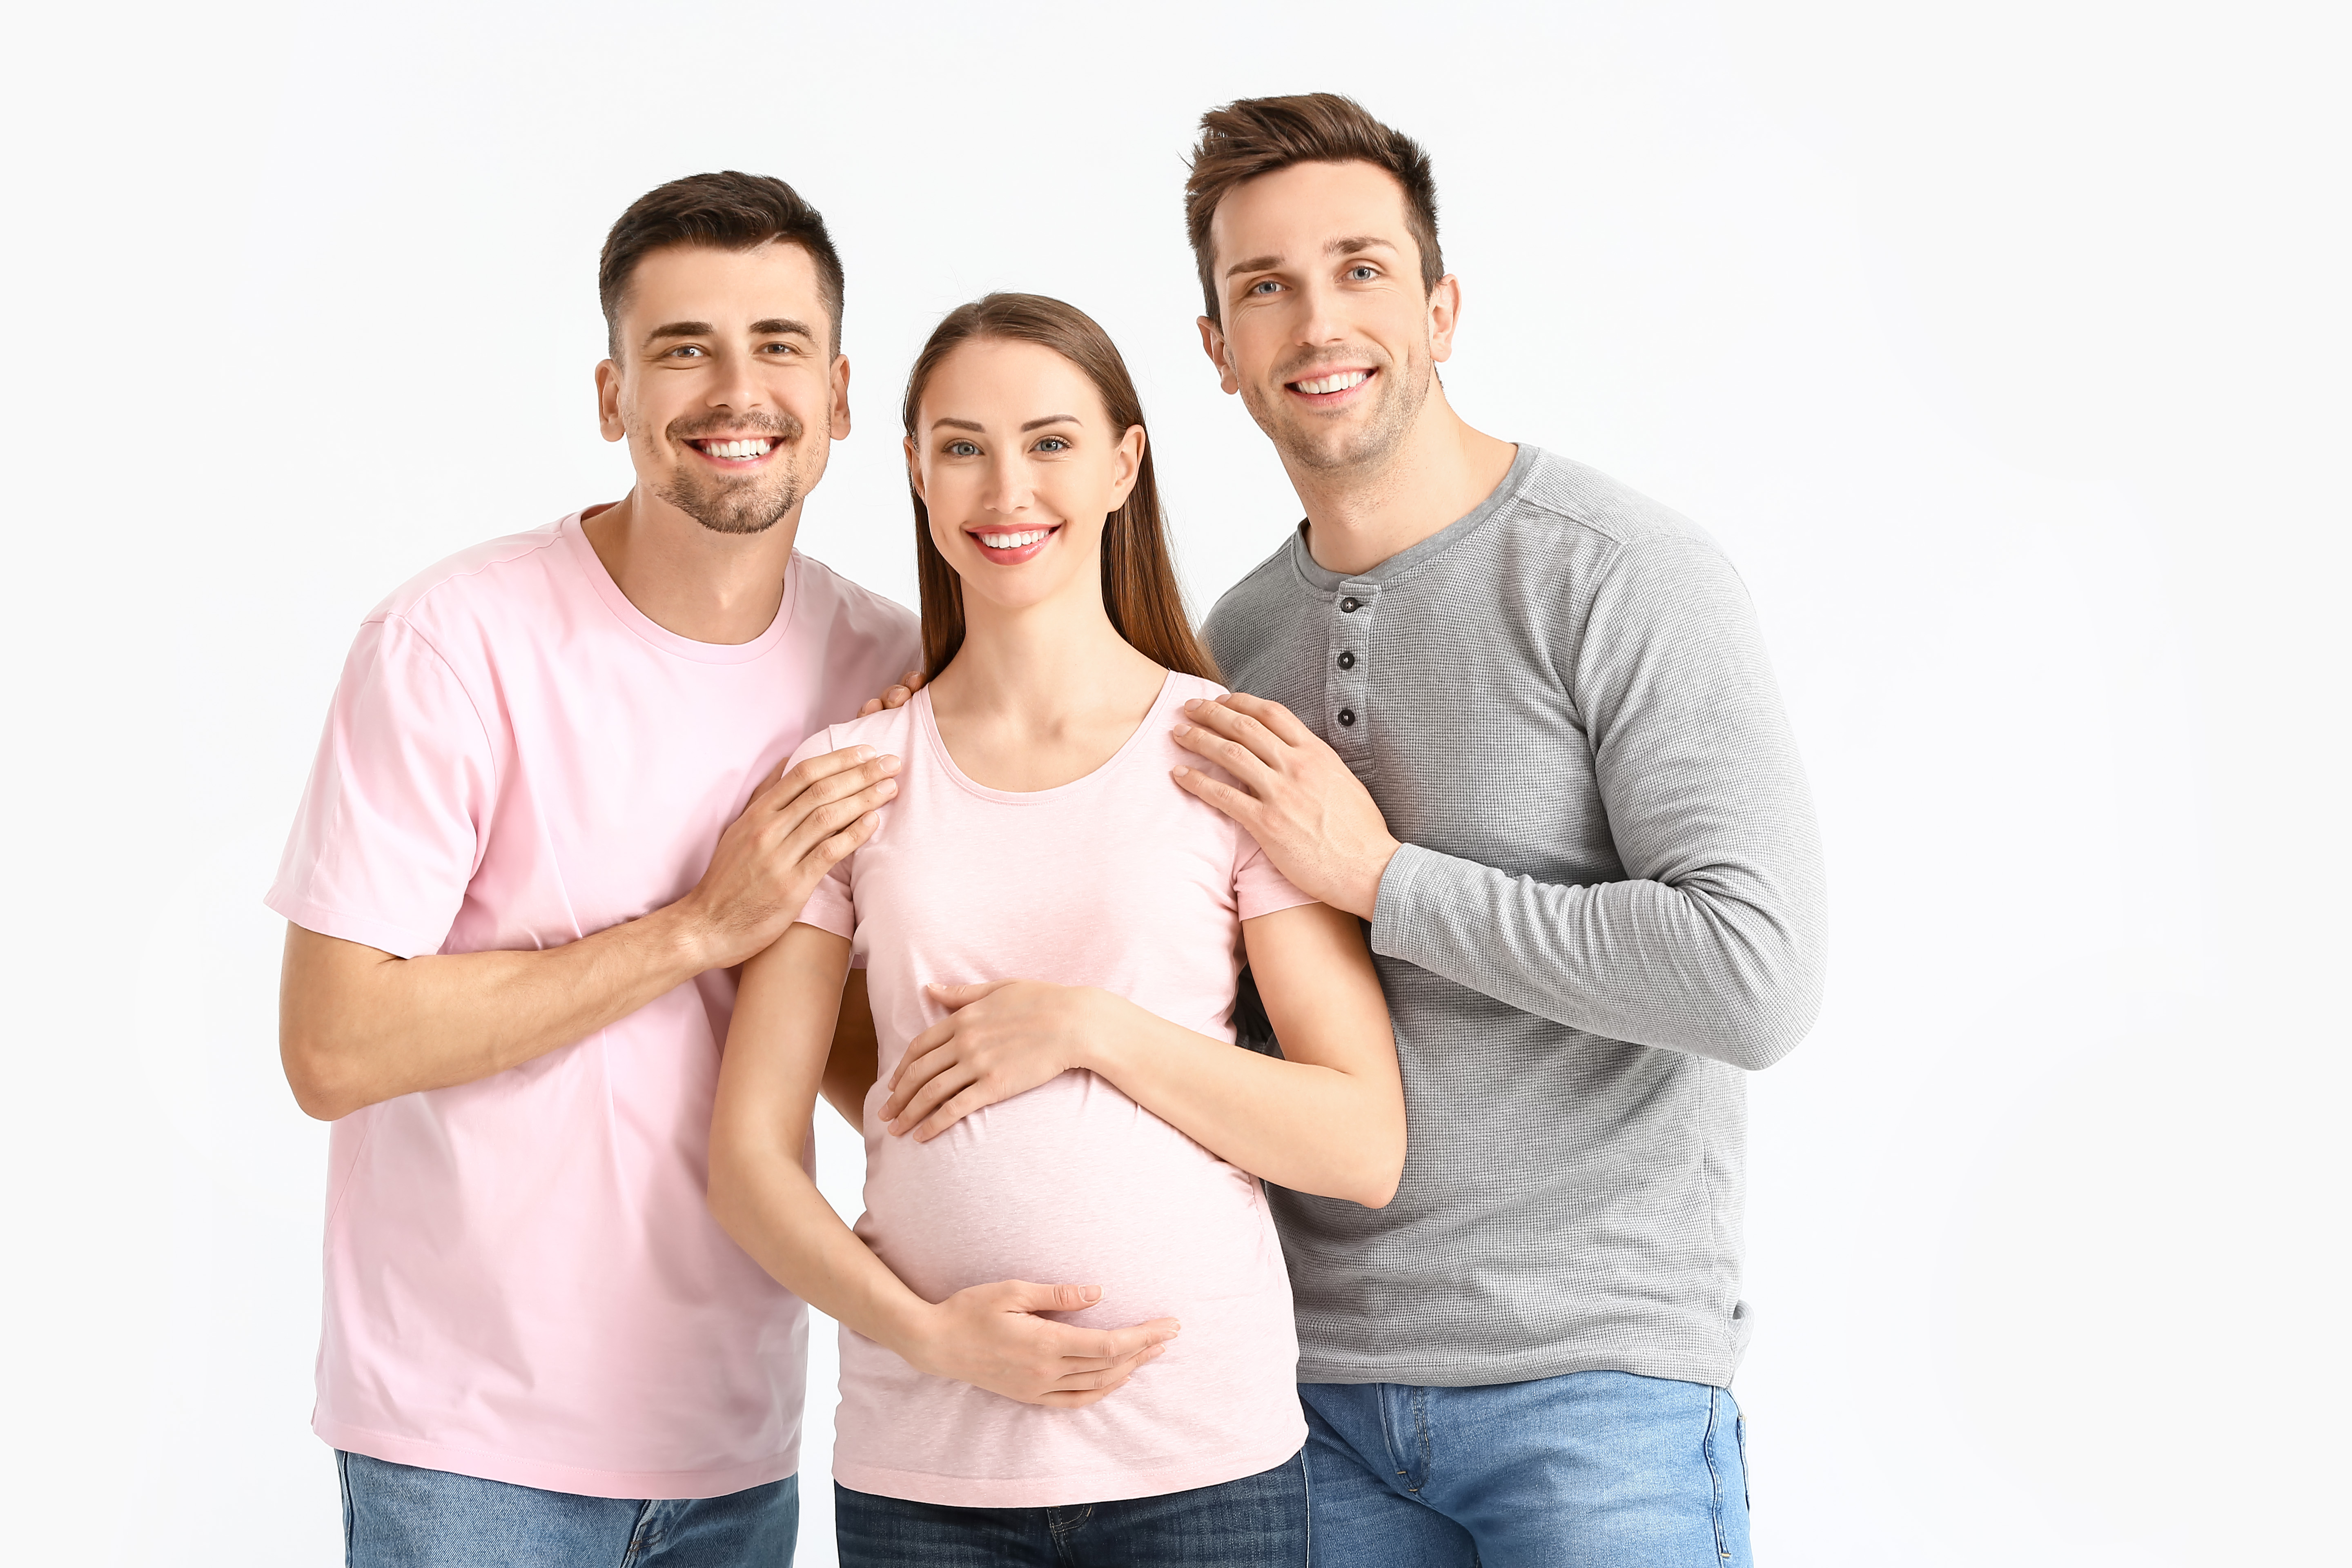 How to Find a Surrogate - Omaha, NE